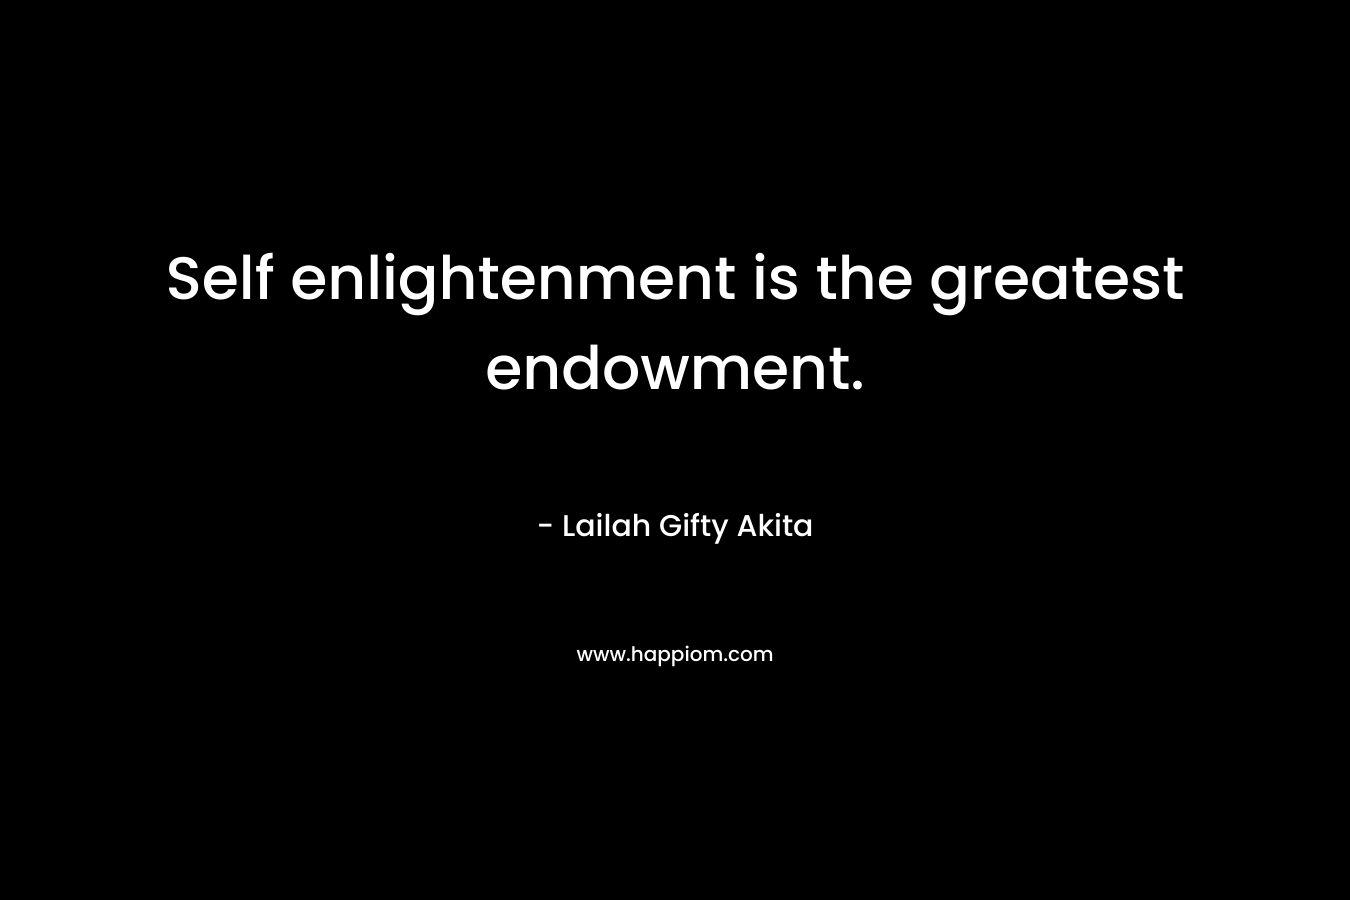 Self enlightenment is the greatest endowment.